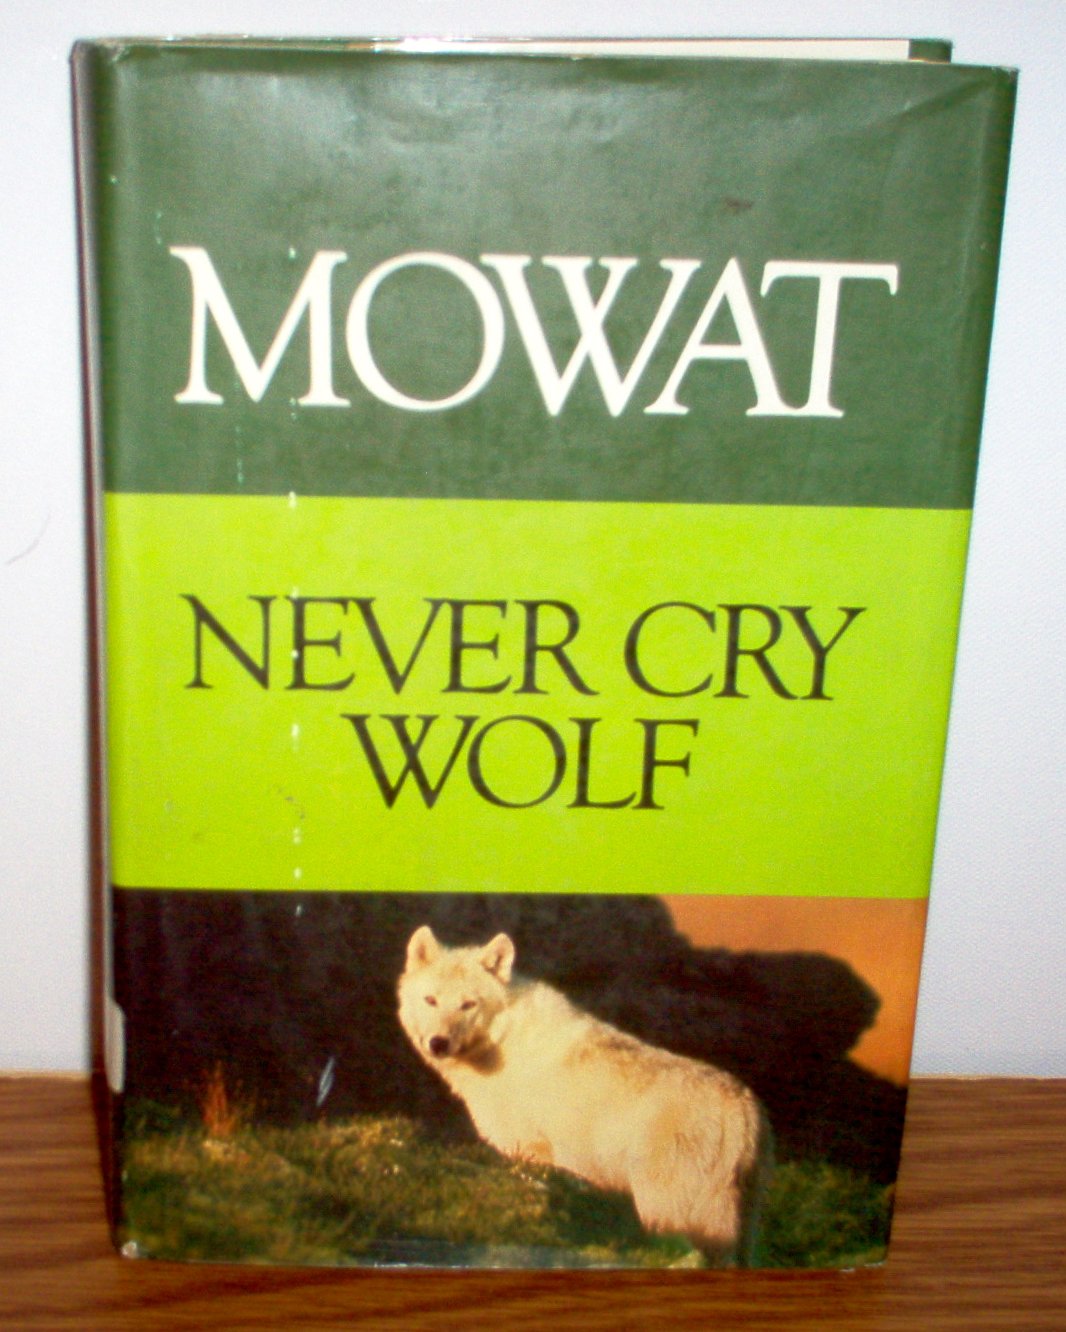 never cry wolf farley